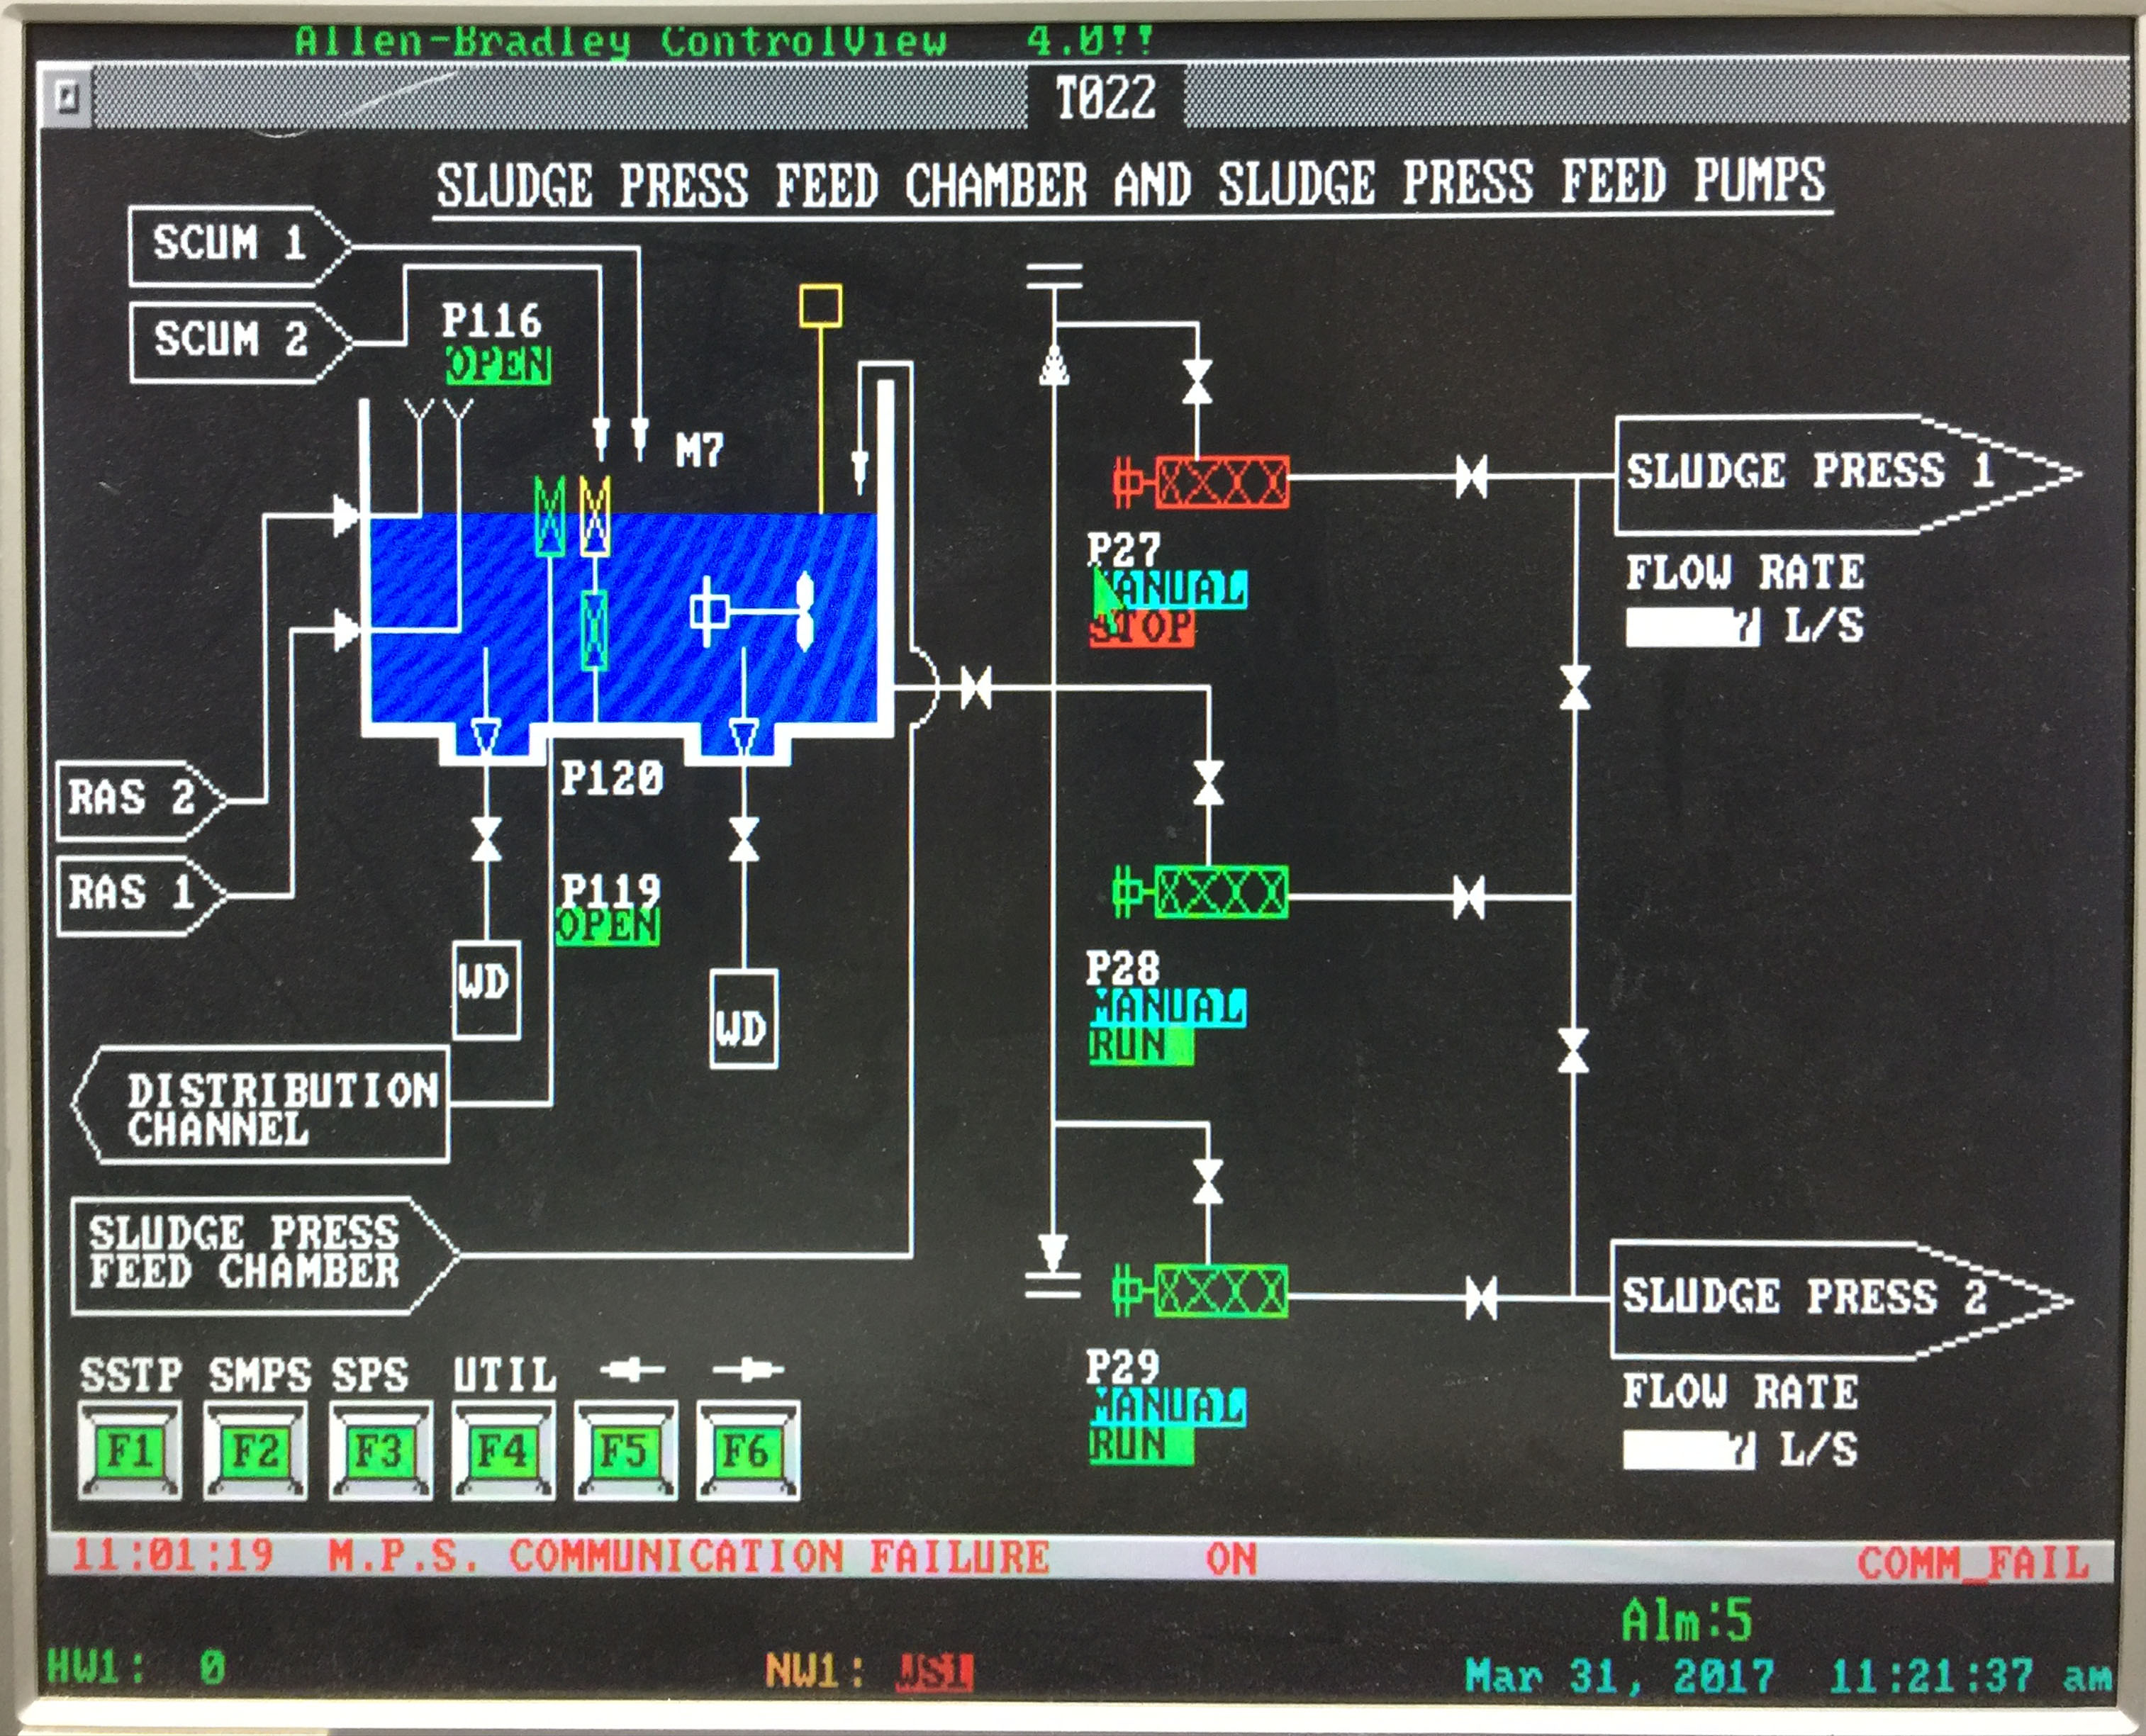 Part of Sludge Press System screenshot from ControlView HMI Before Works in DSD Stanley STW